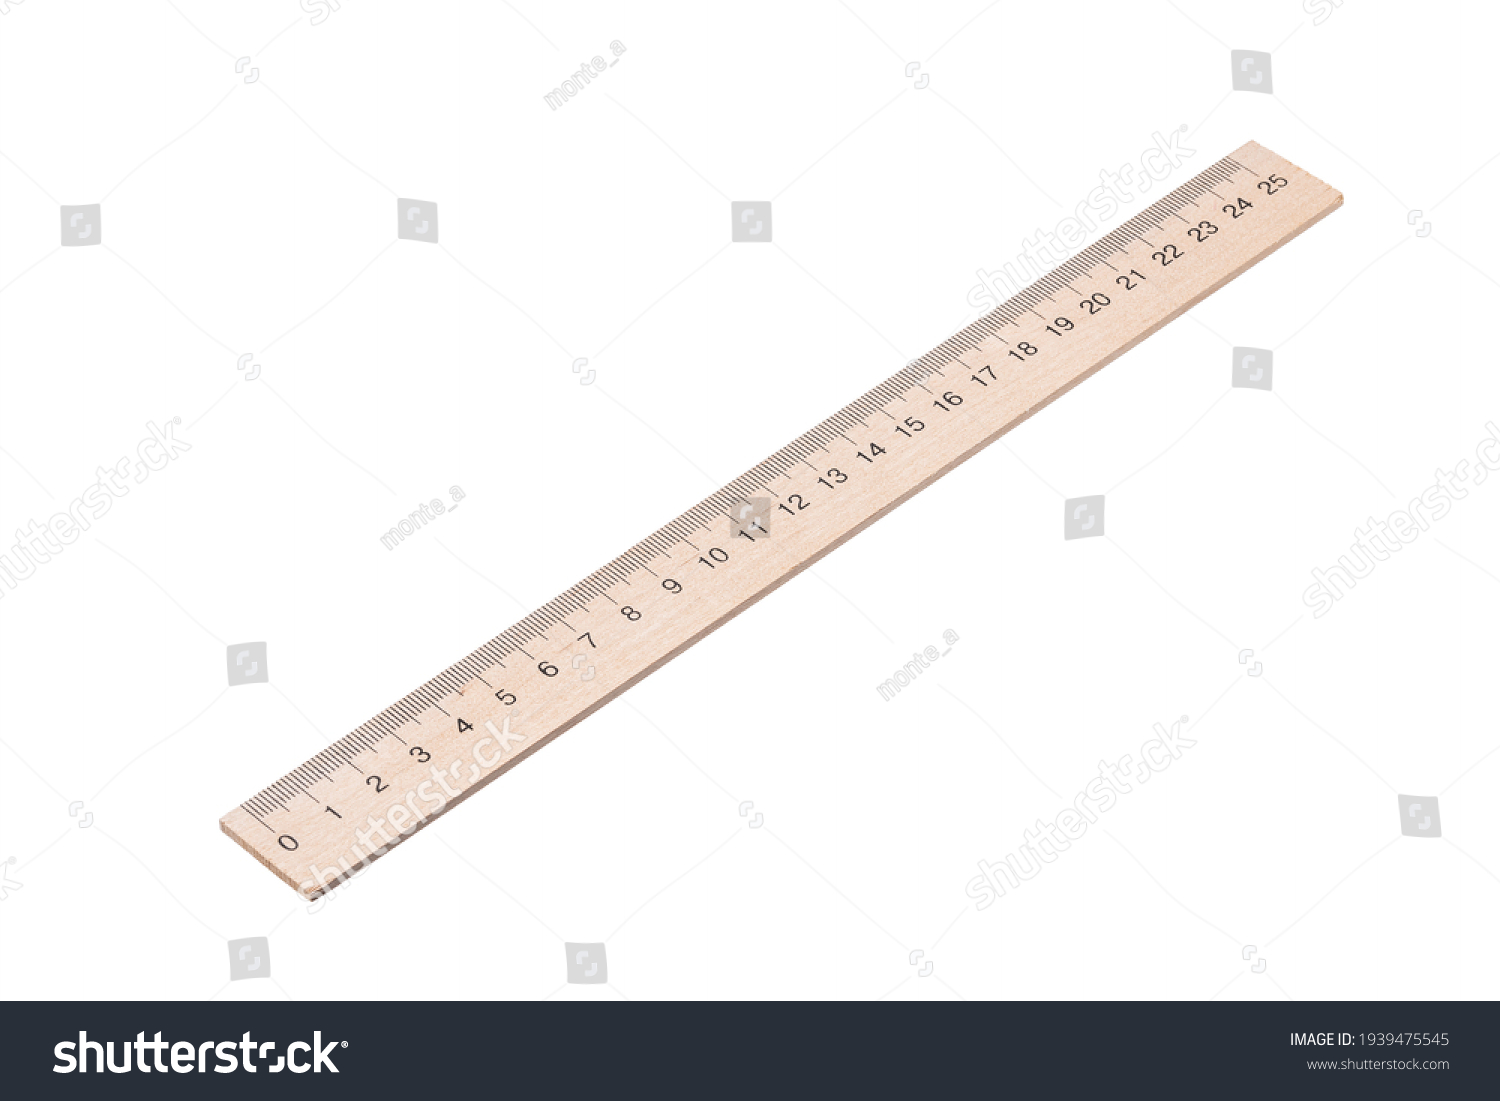 wooden ruler isolated on white background. measure school tool cut out. #1939475545